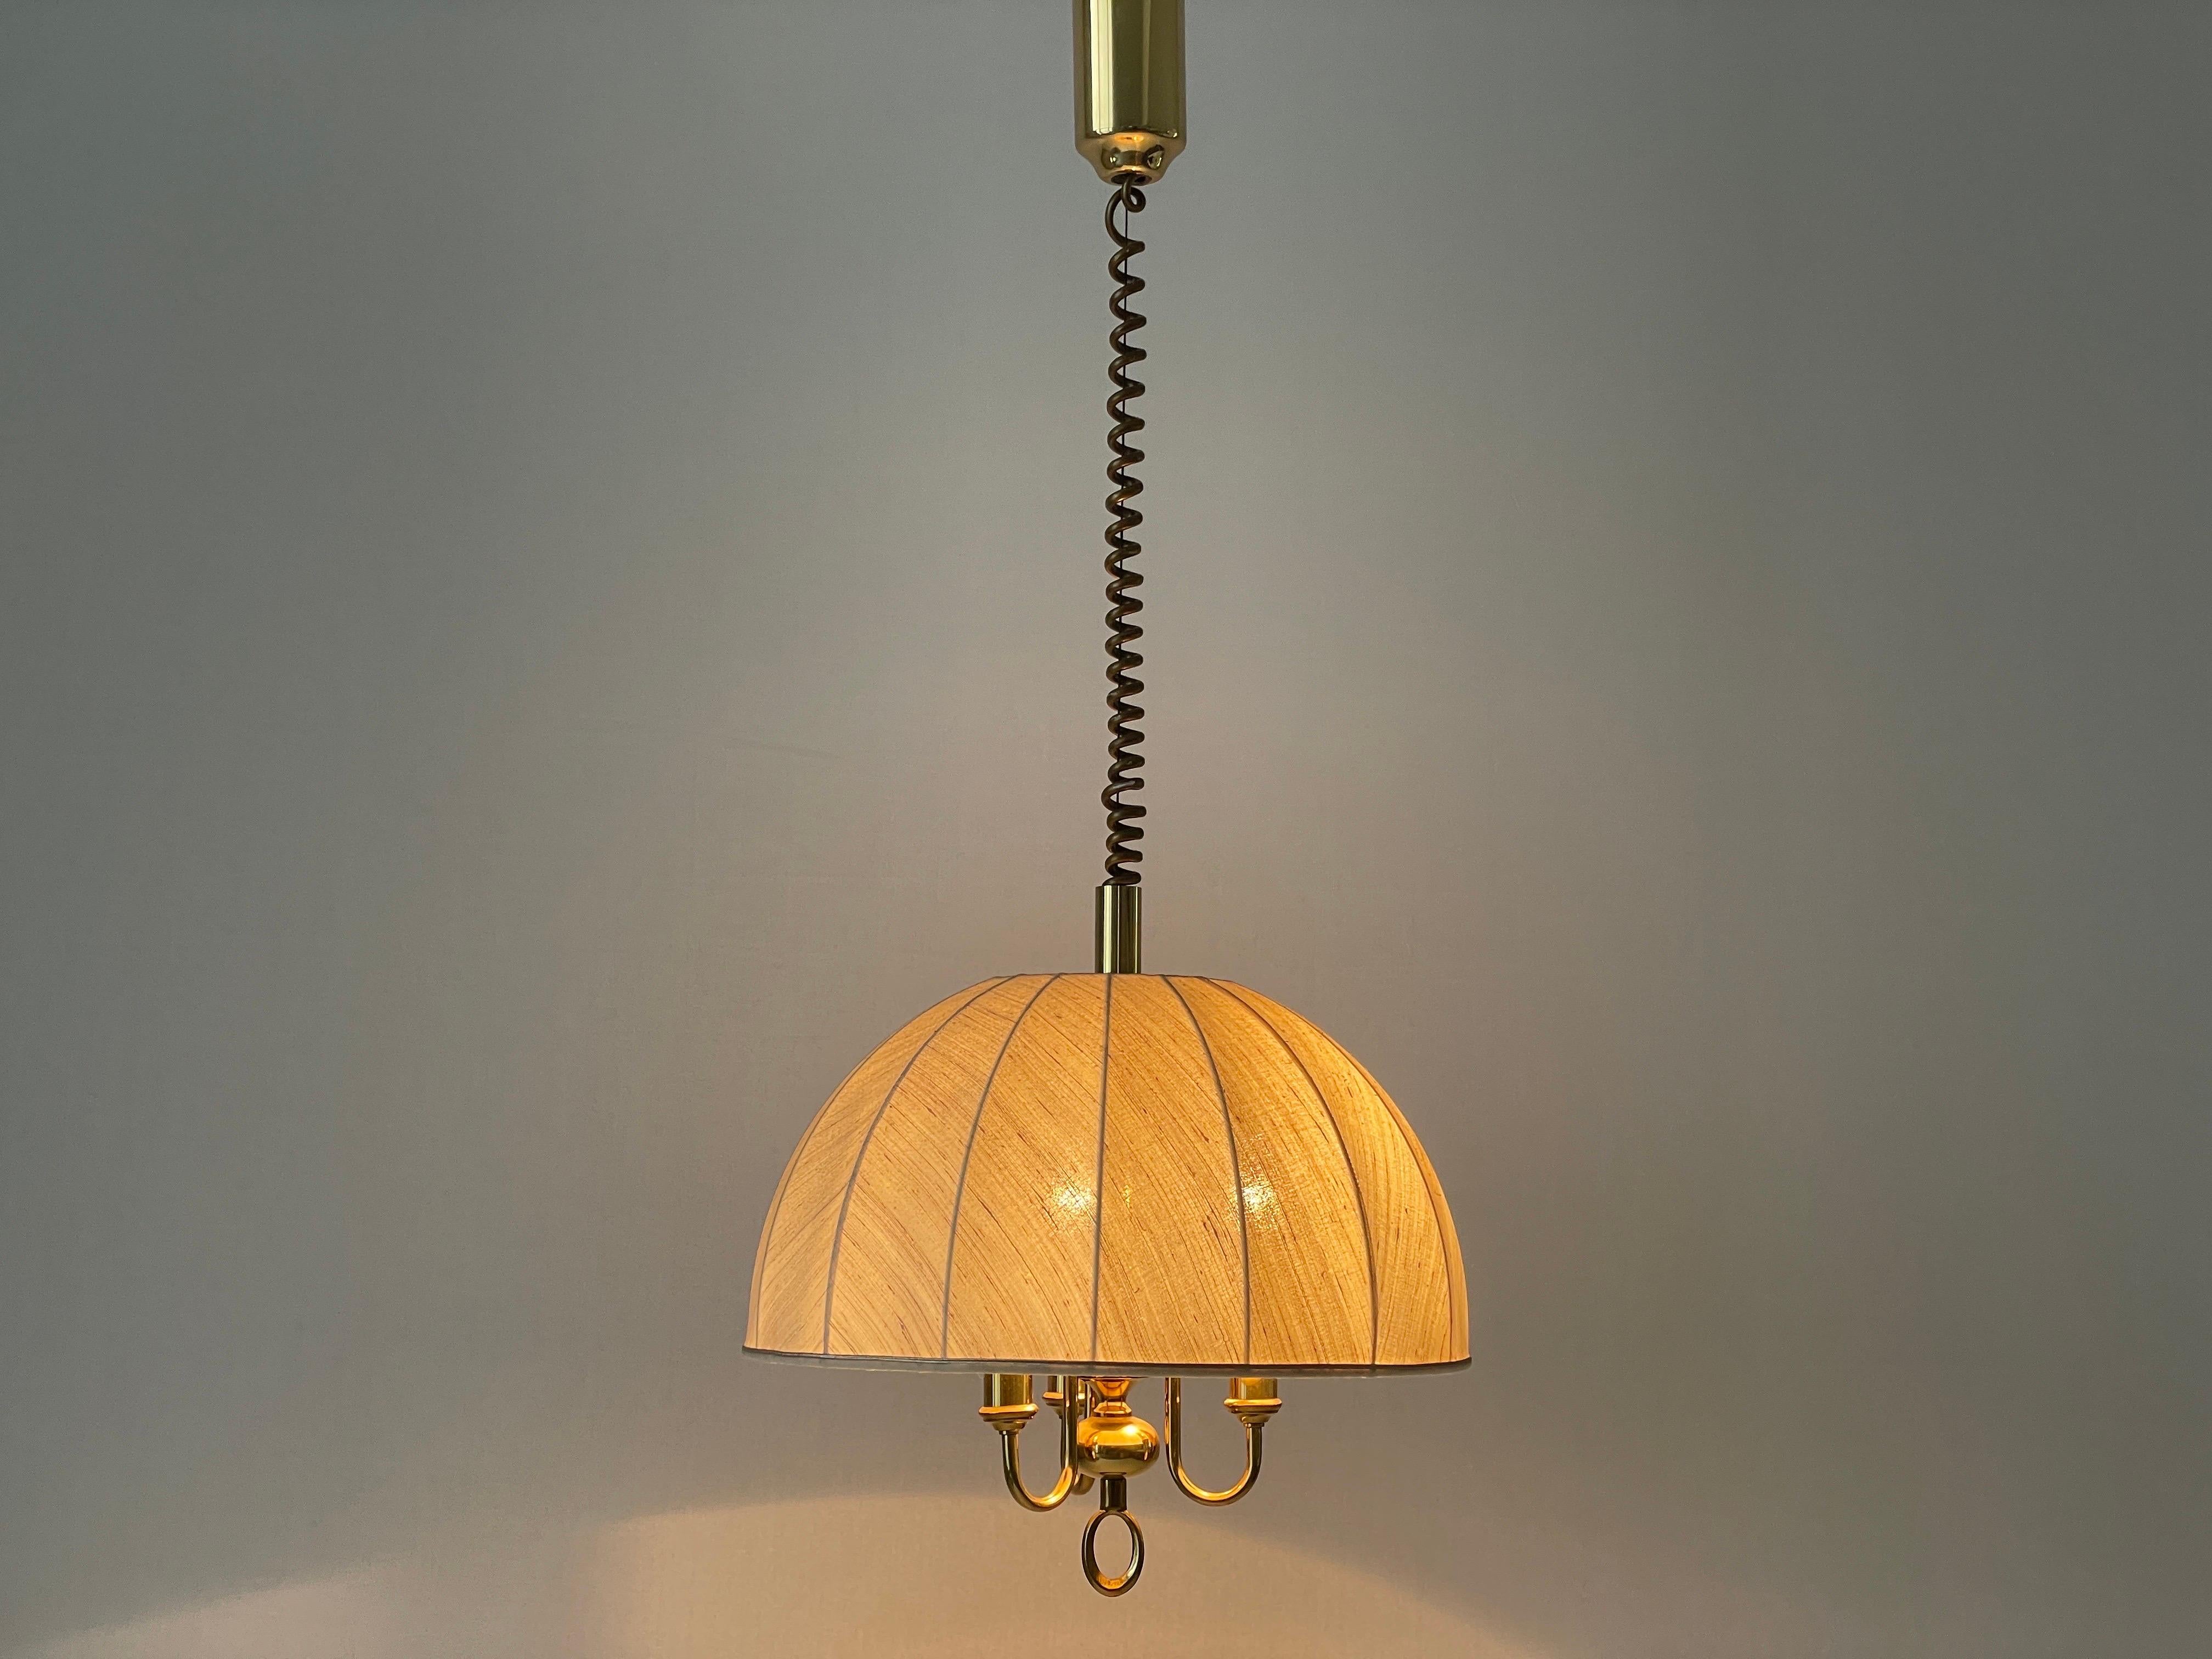 Fabric and Brass 3 socket Adjustable Shade Pendant Lamp by WKR, 1970s, Germany For Sale 6